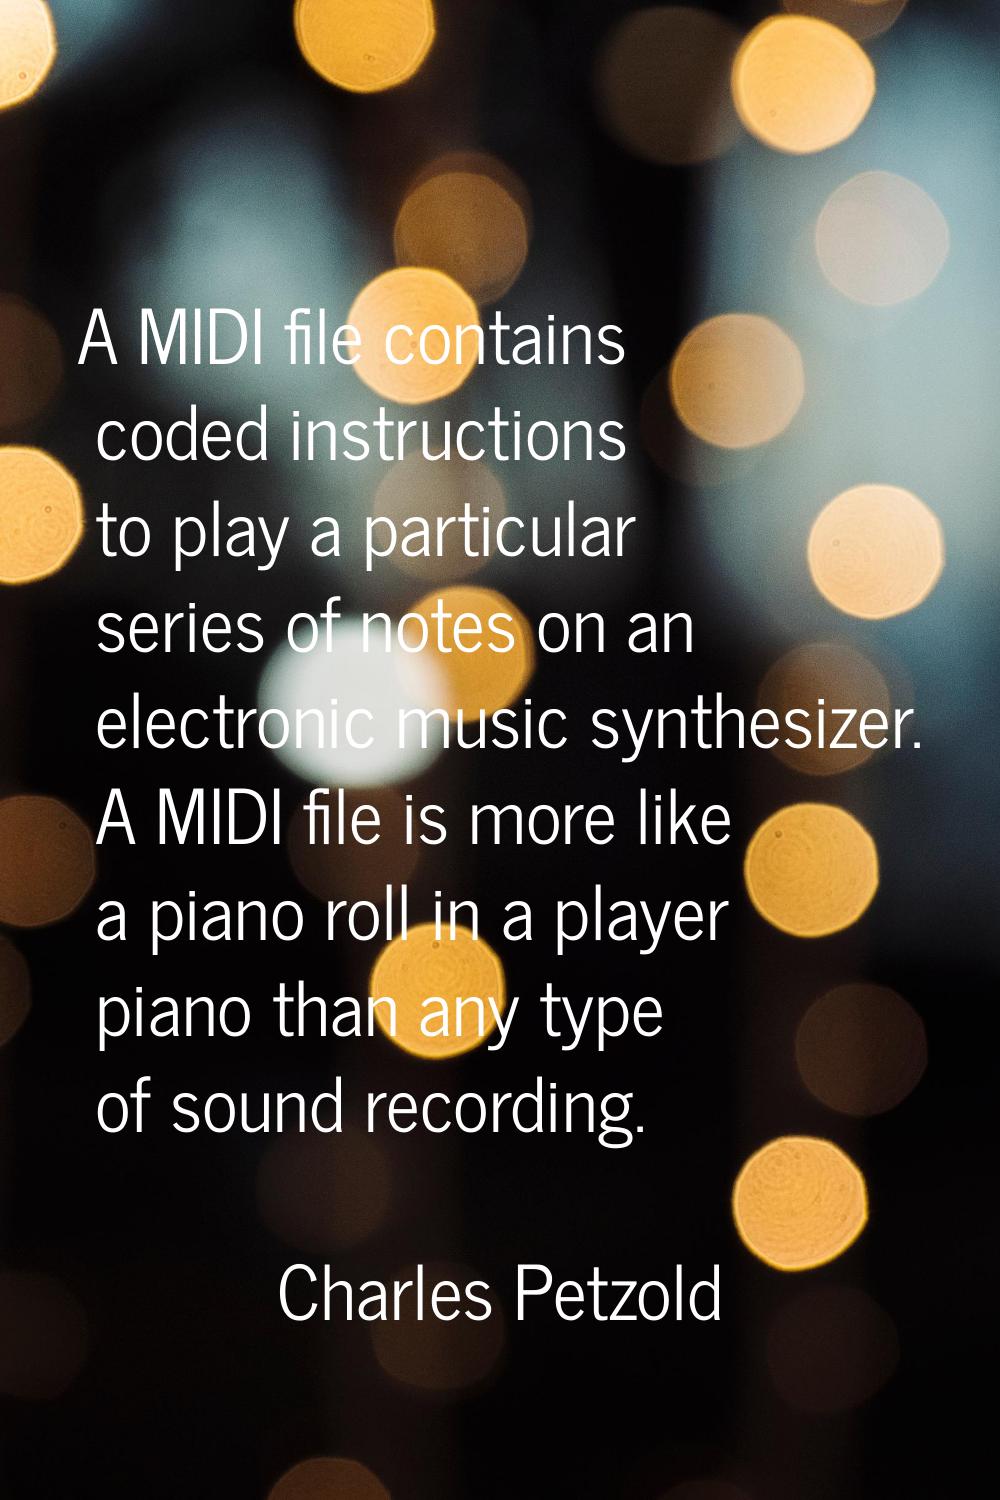 A MIDI file contains coded instructions to play a particular series of notes on an electronic music